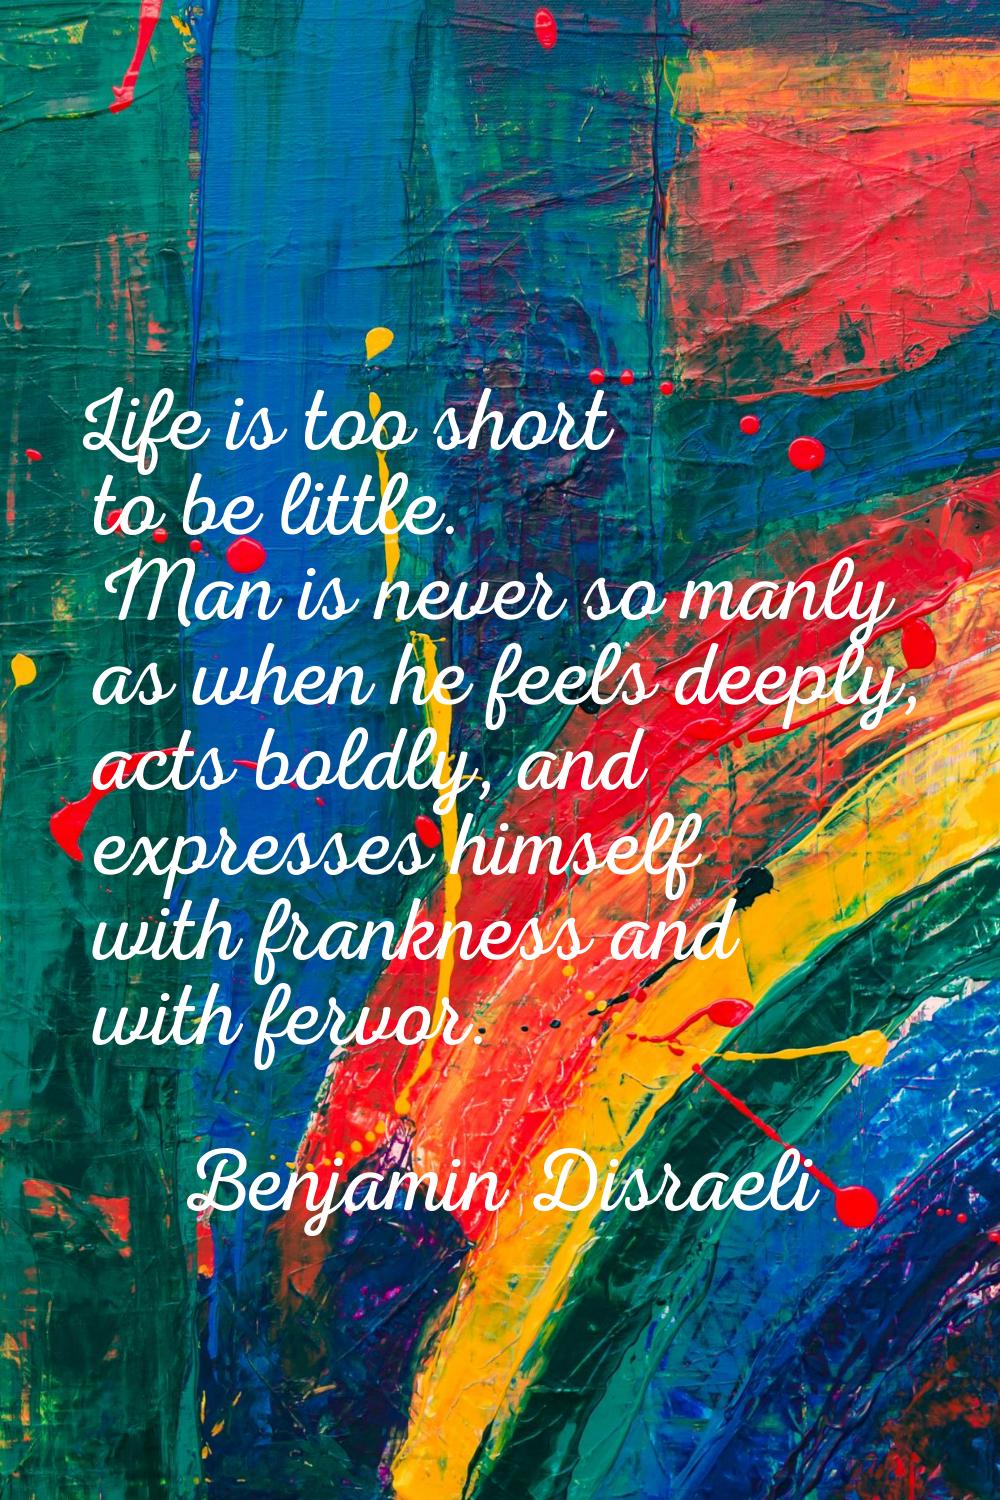 Life is too short to be little. Man is never so manly as when he feels deeply, acts boldly, and exp